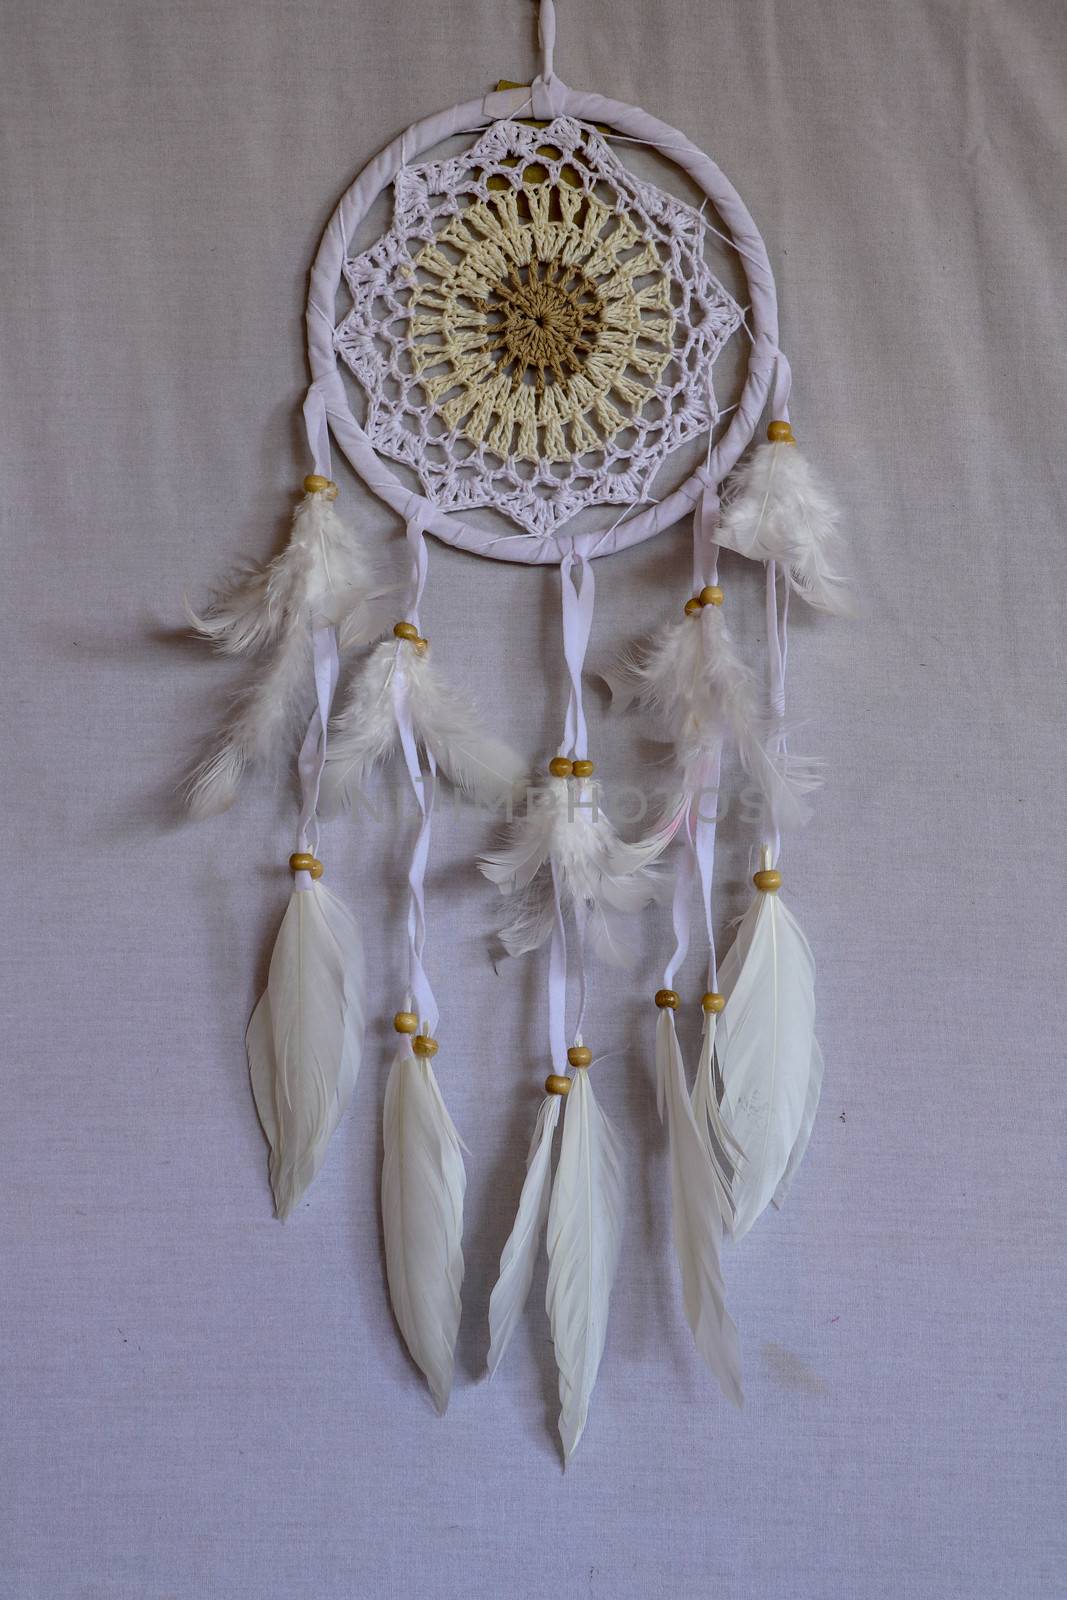 White crocheted dreamcatcher, an Indian amulet that protects the sleeper from evil spirits and diseases. Soft focus. Closeup.